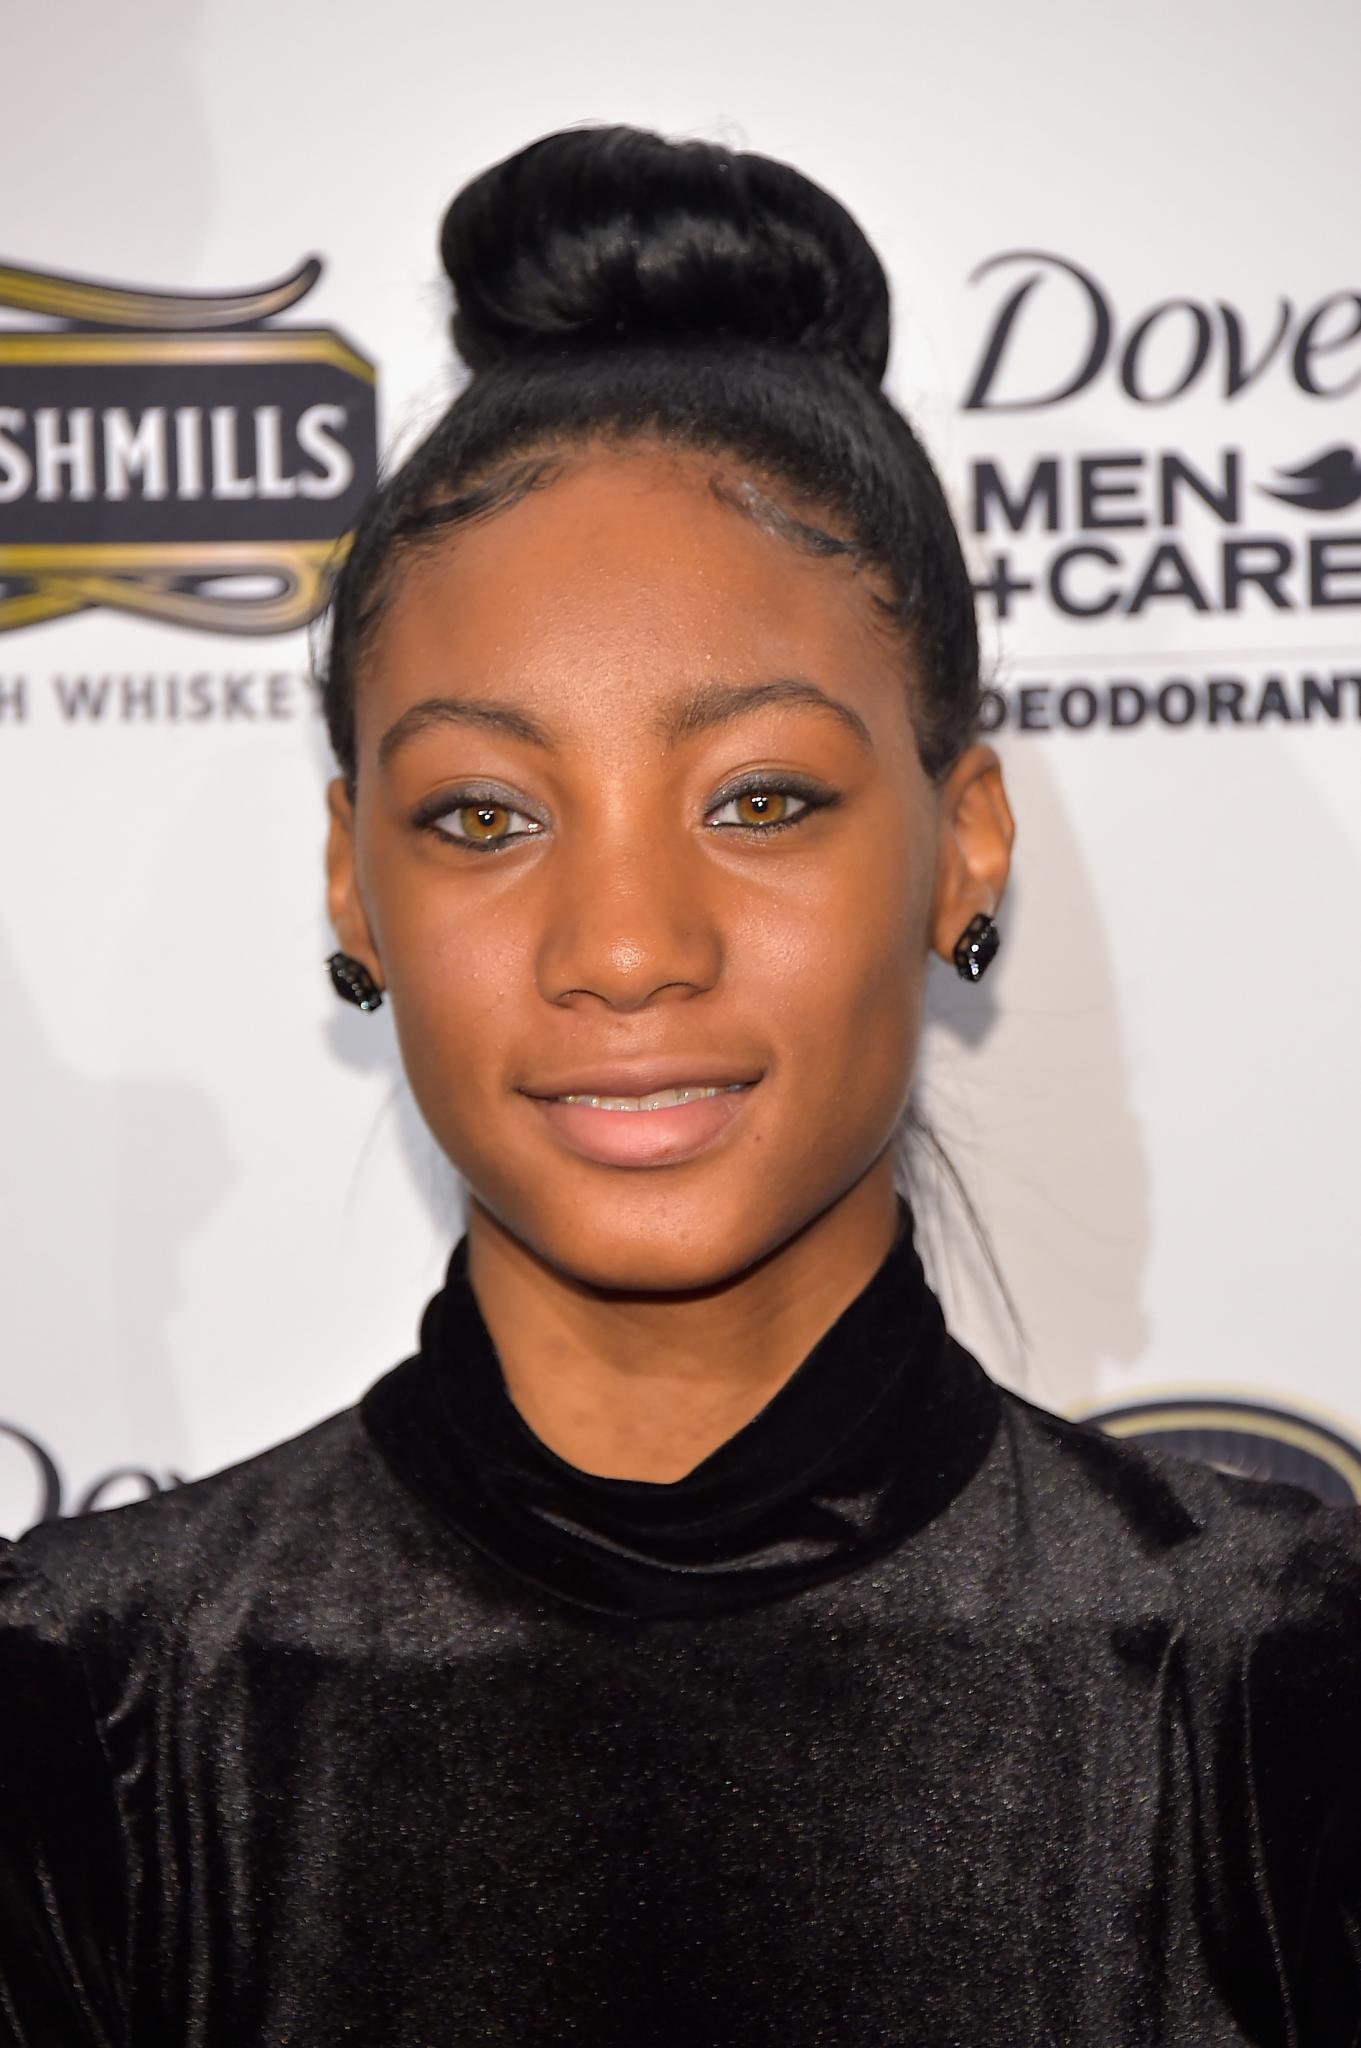 Mo'ne Davis: Being a Girl in Male-Dominated Sports Is "Pretty Crazy"